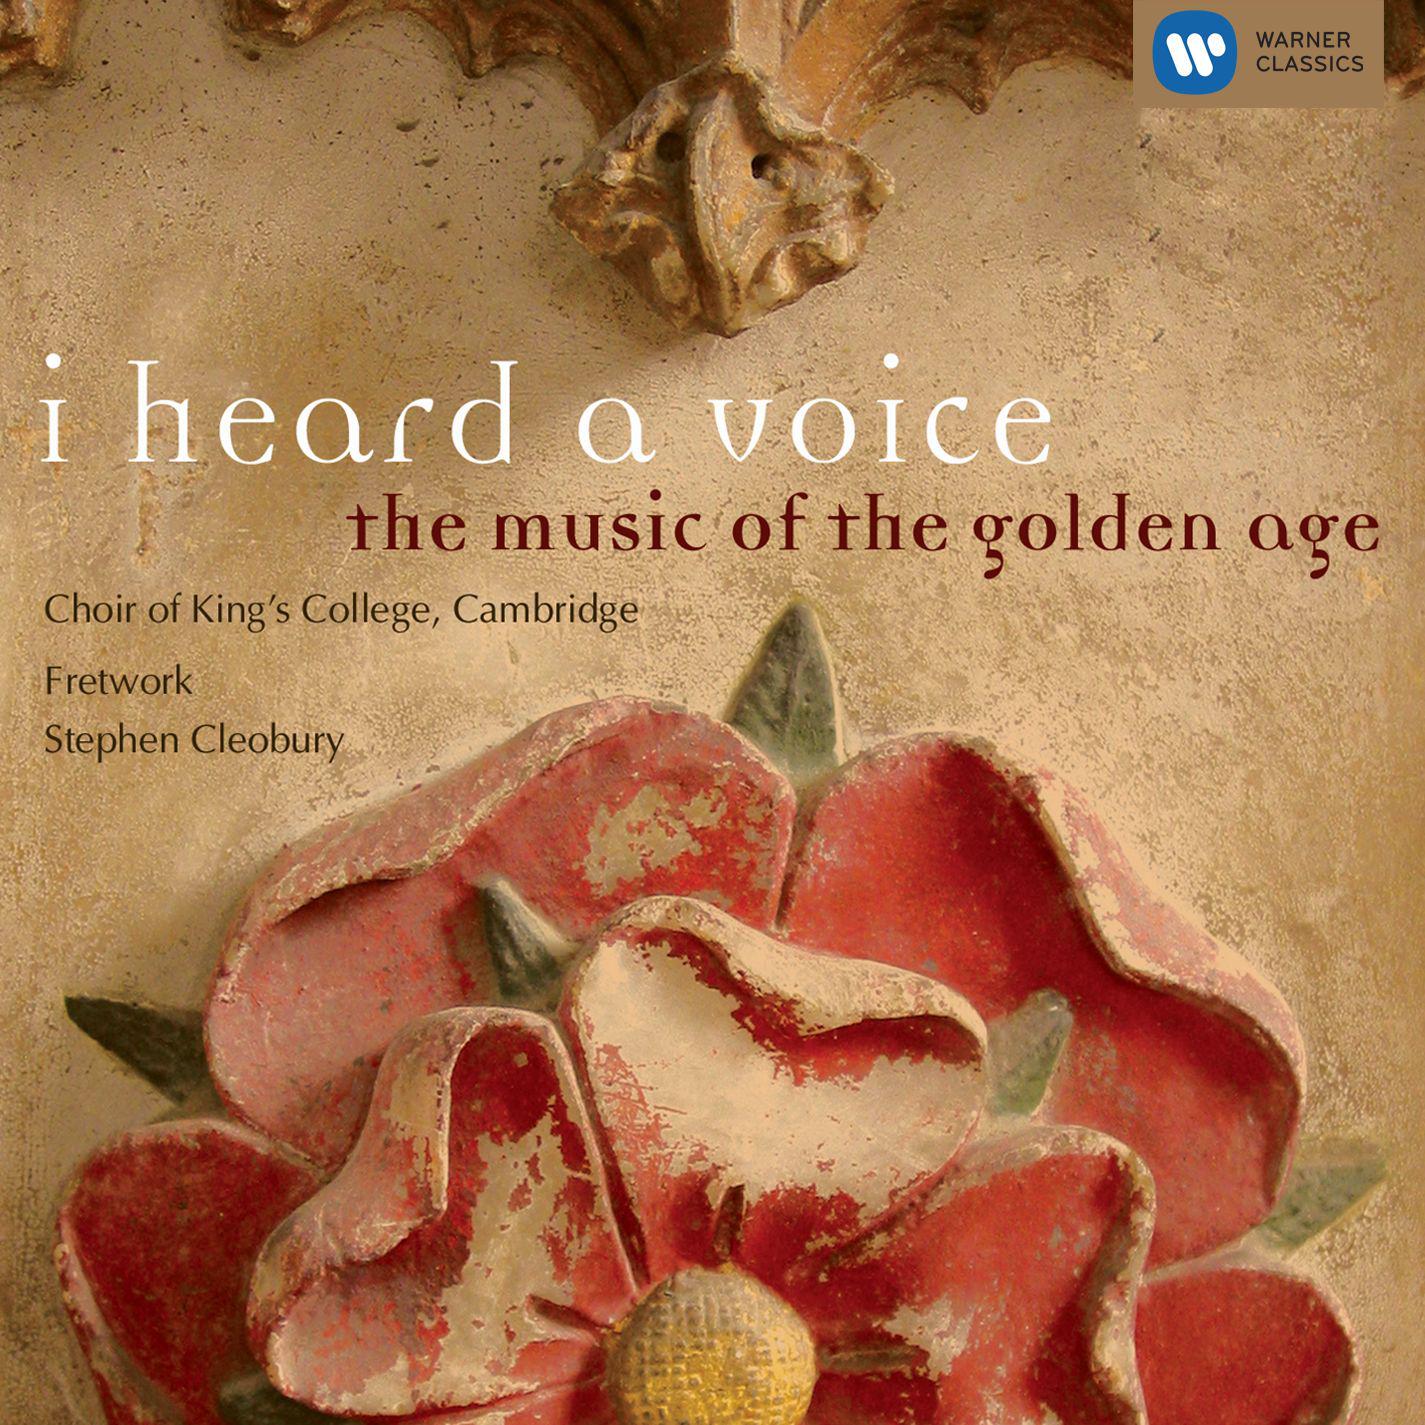 I heard a voice - the music of the golden age